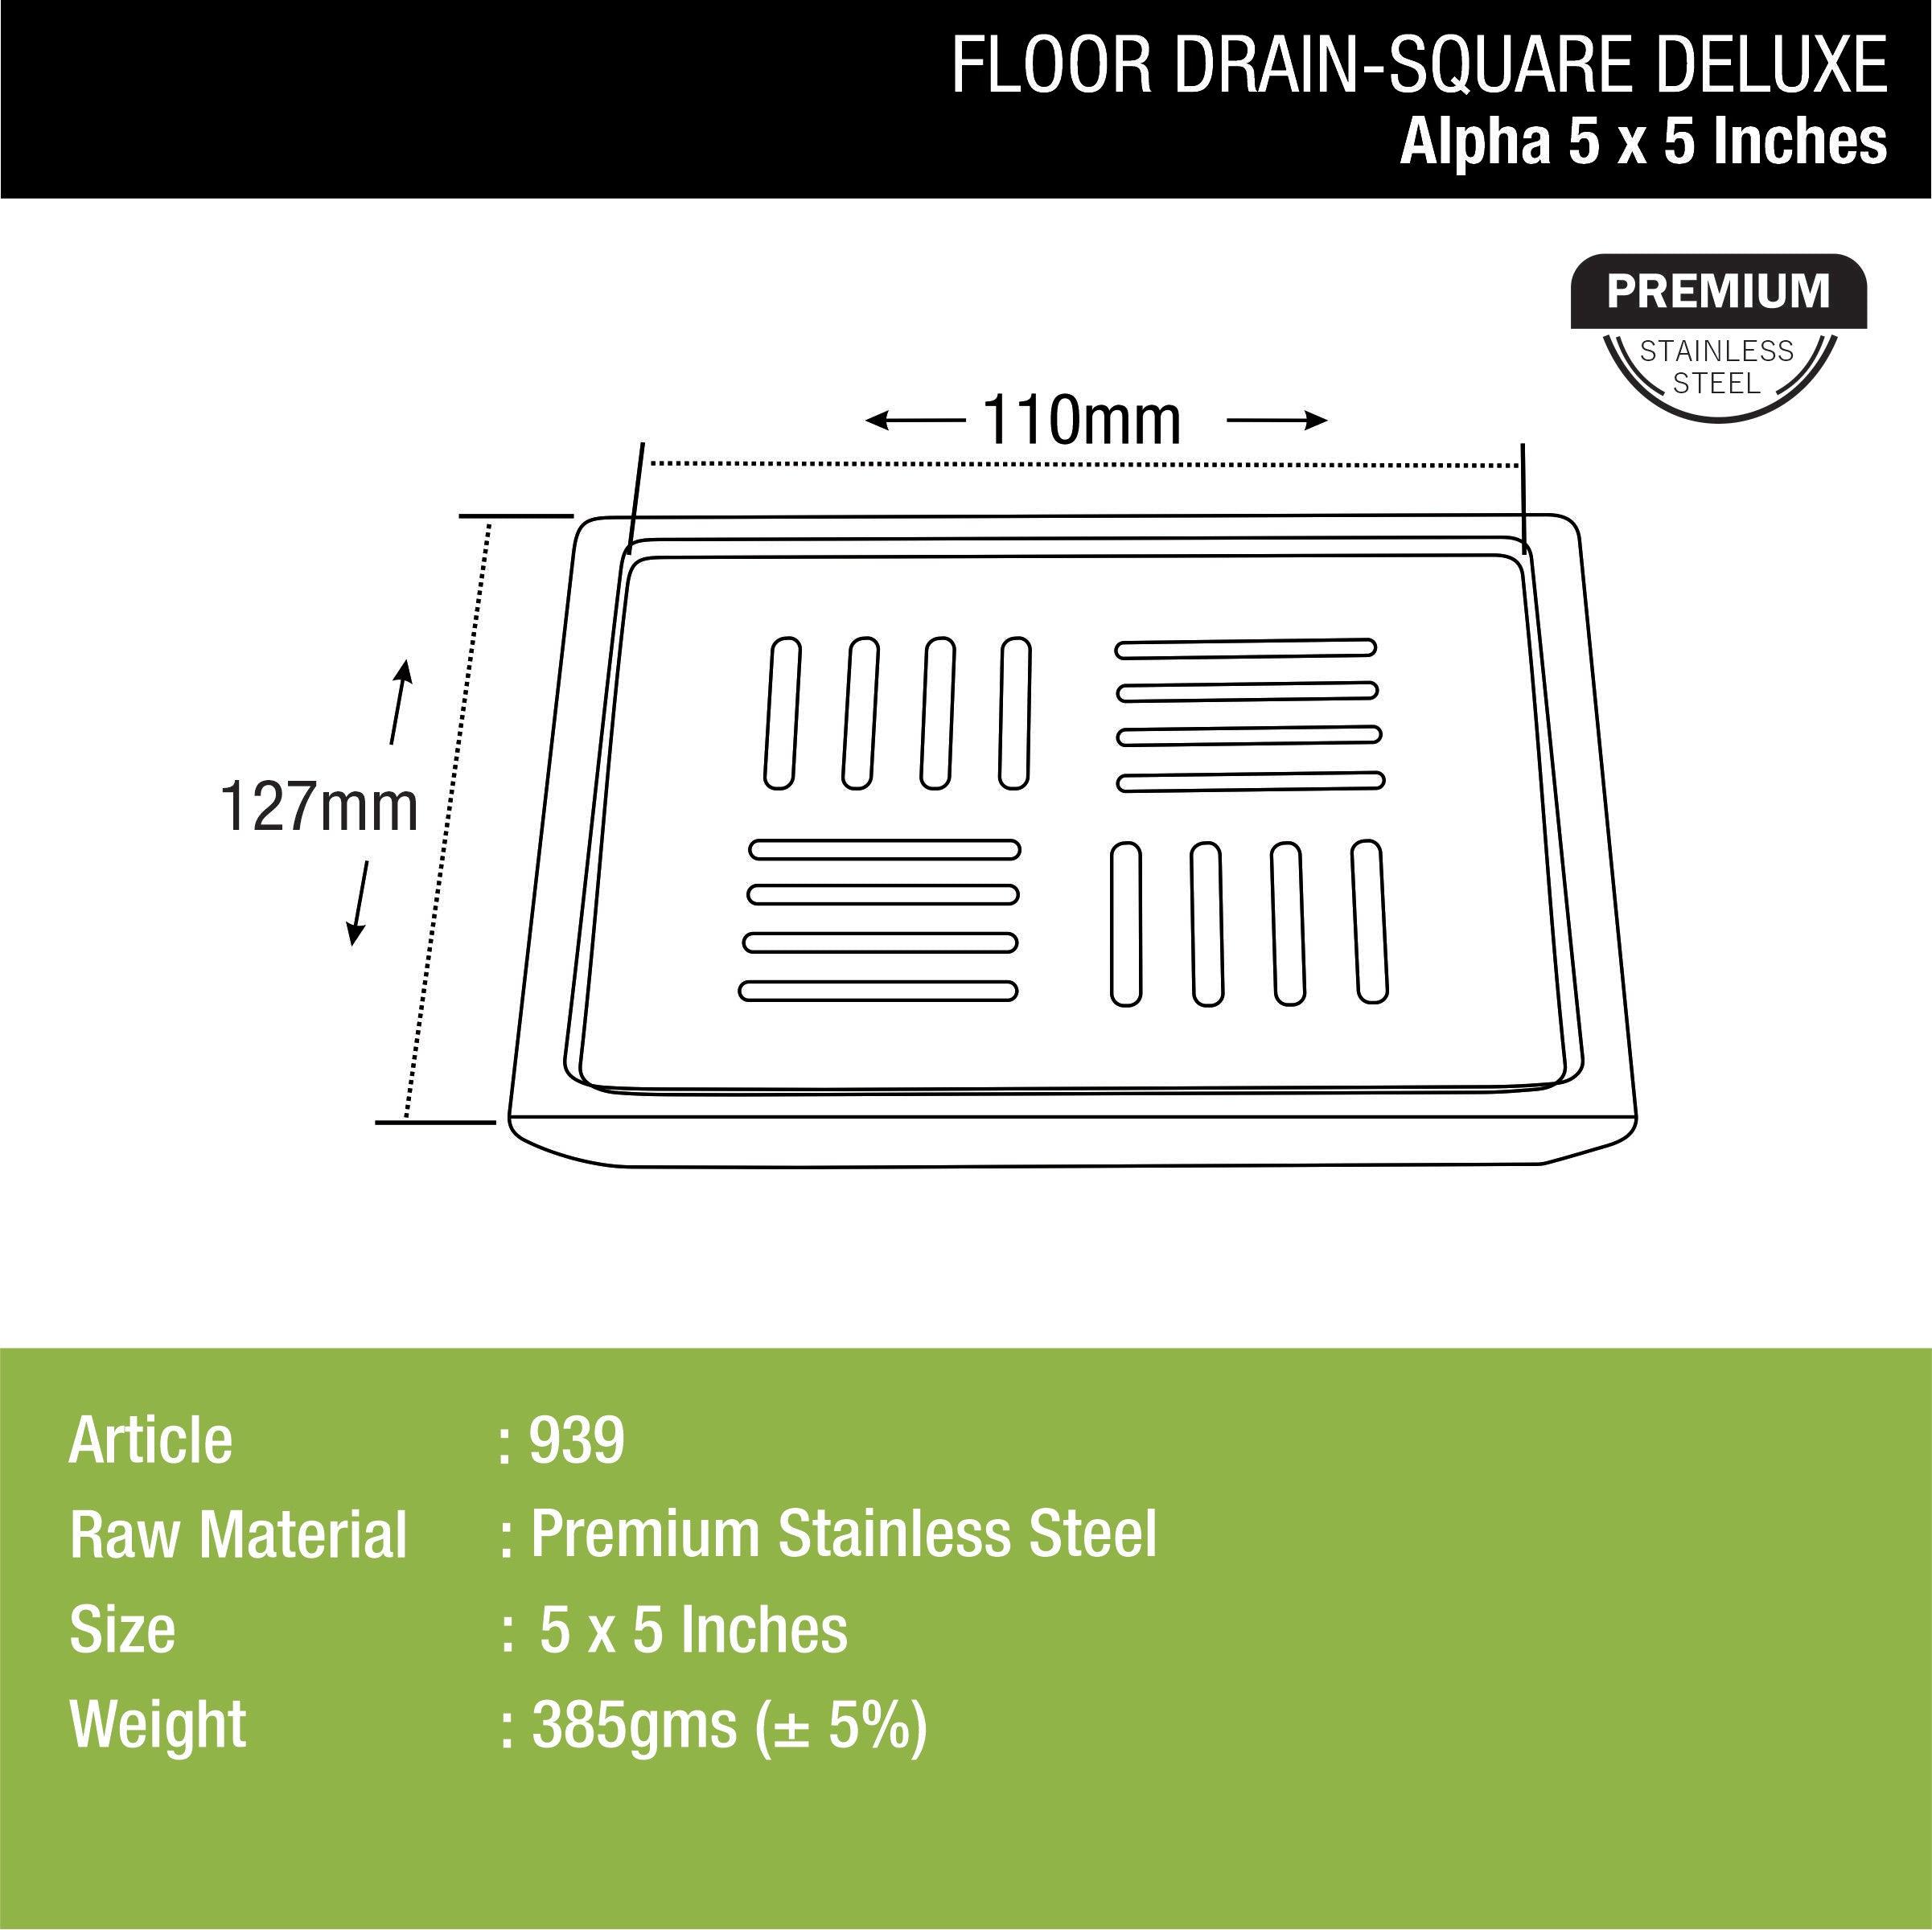 Alpha Deluxe Square Floor Drain (5 x 5 Inches) dimensions and sizes